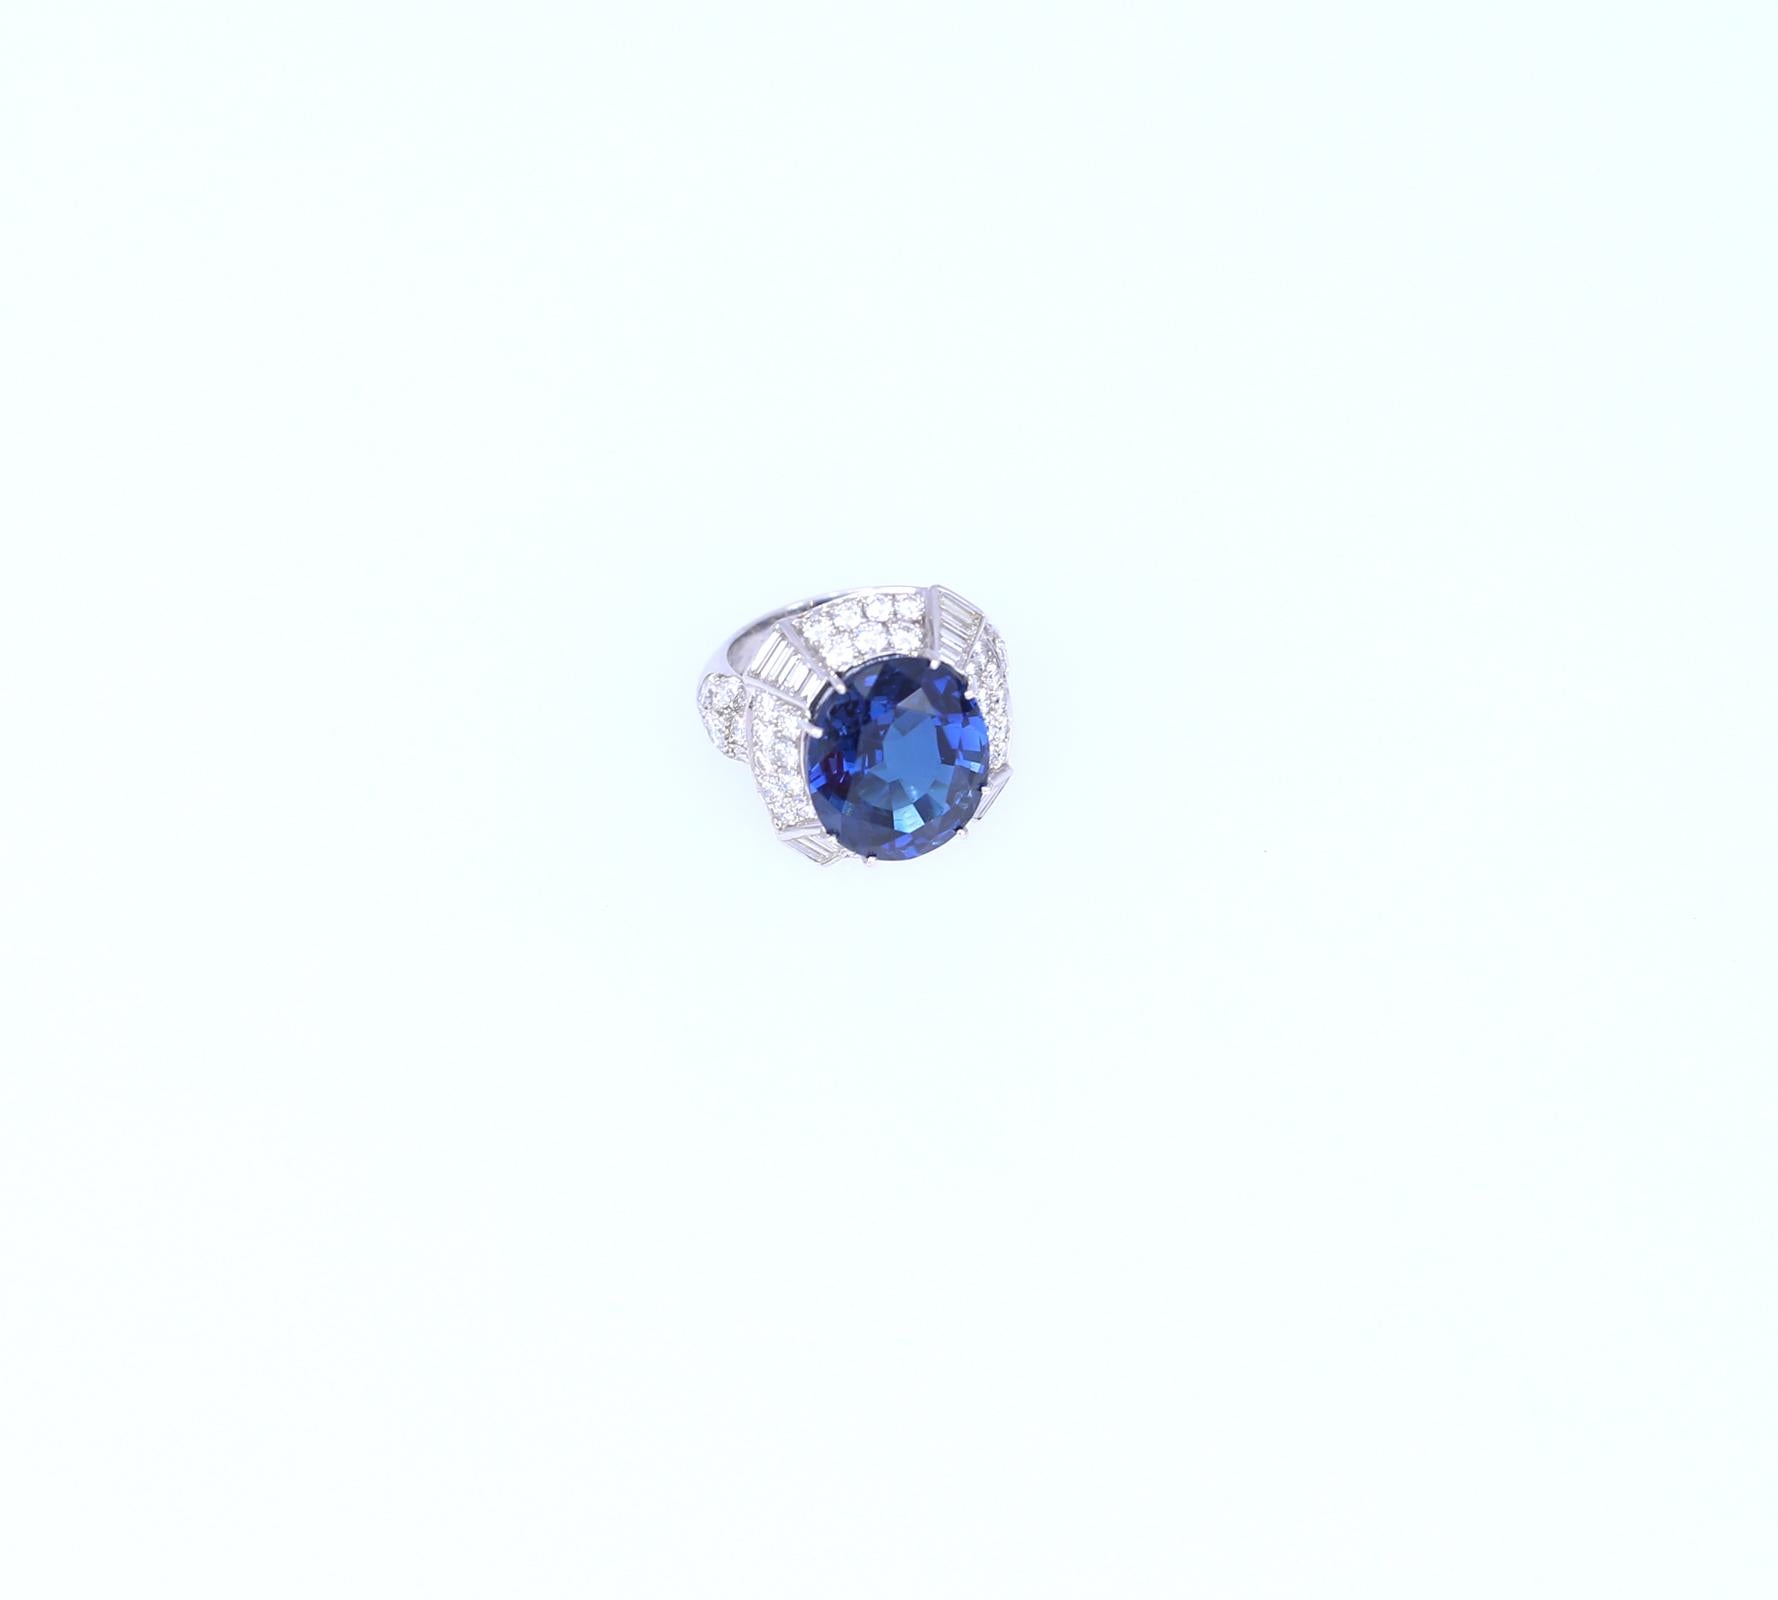 14.6 Ct Natural Sapphire Certified Diamond Ring 18K Gold, 1998 For Sale 7